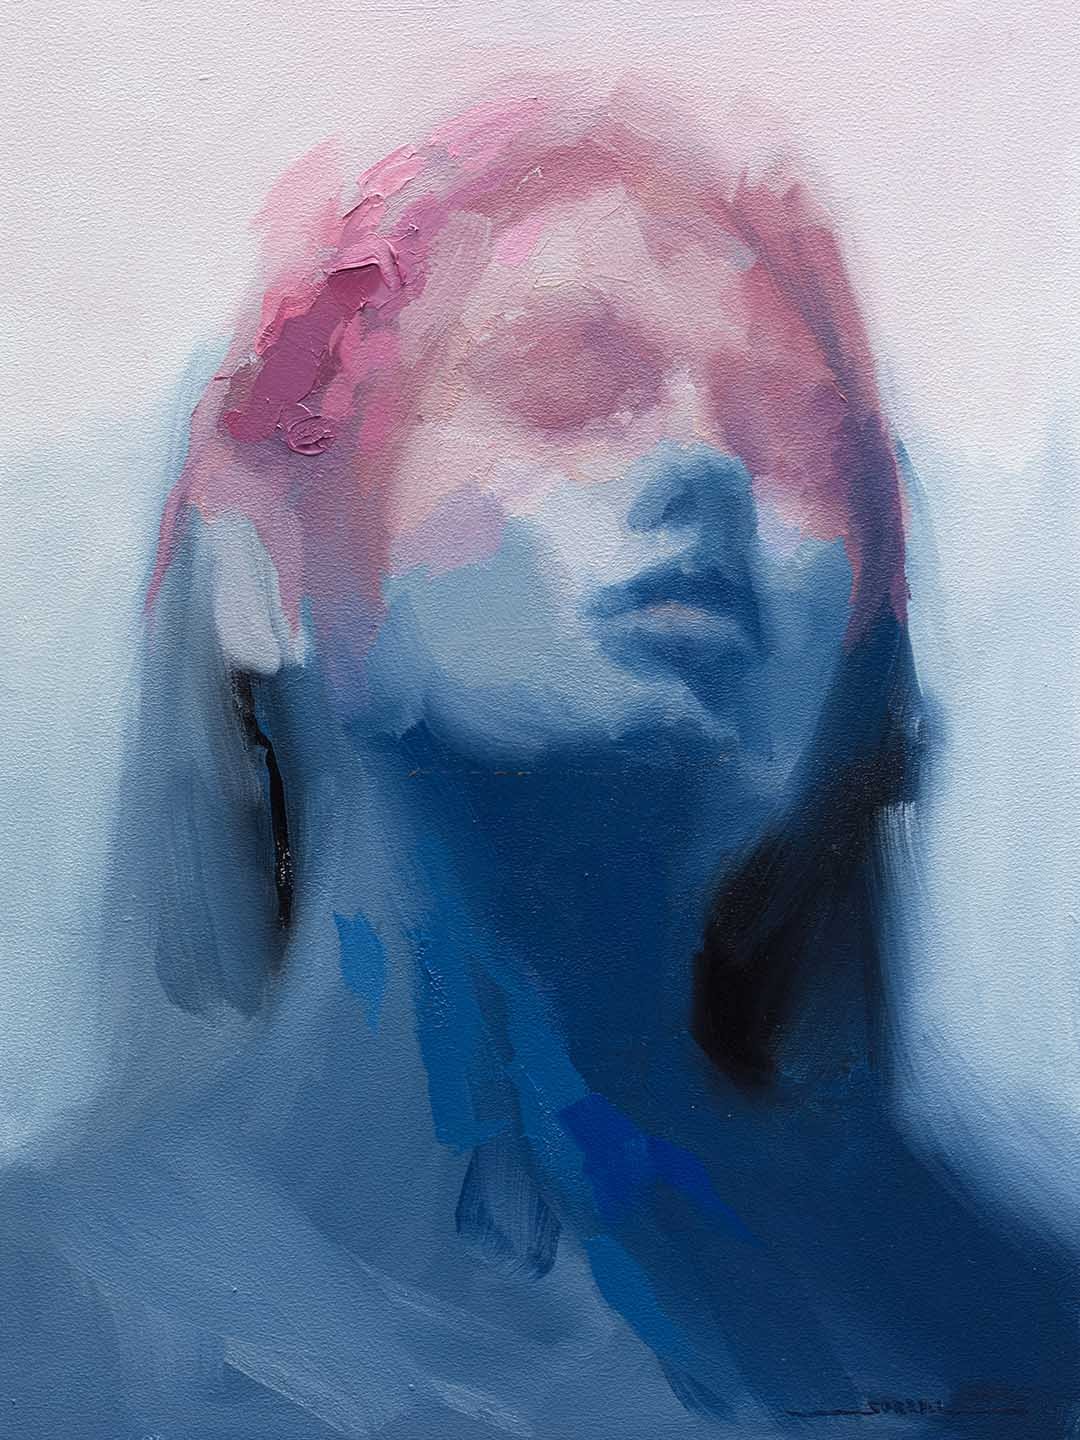 Image of "Absolute" | 9x12 inch | oil on panel